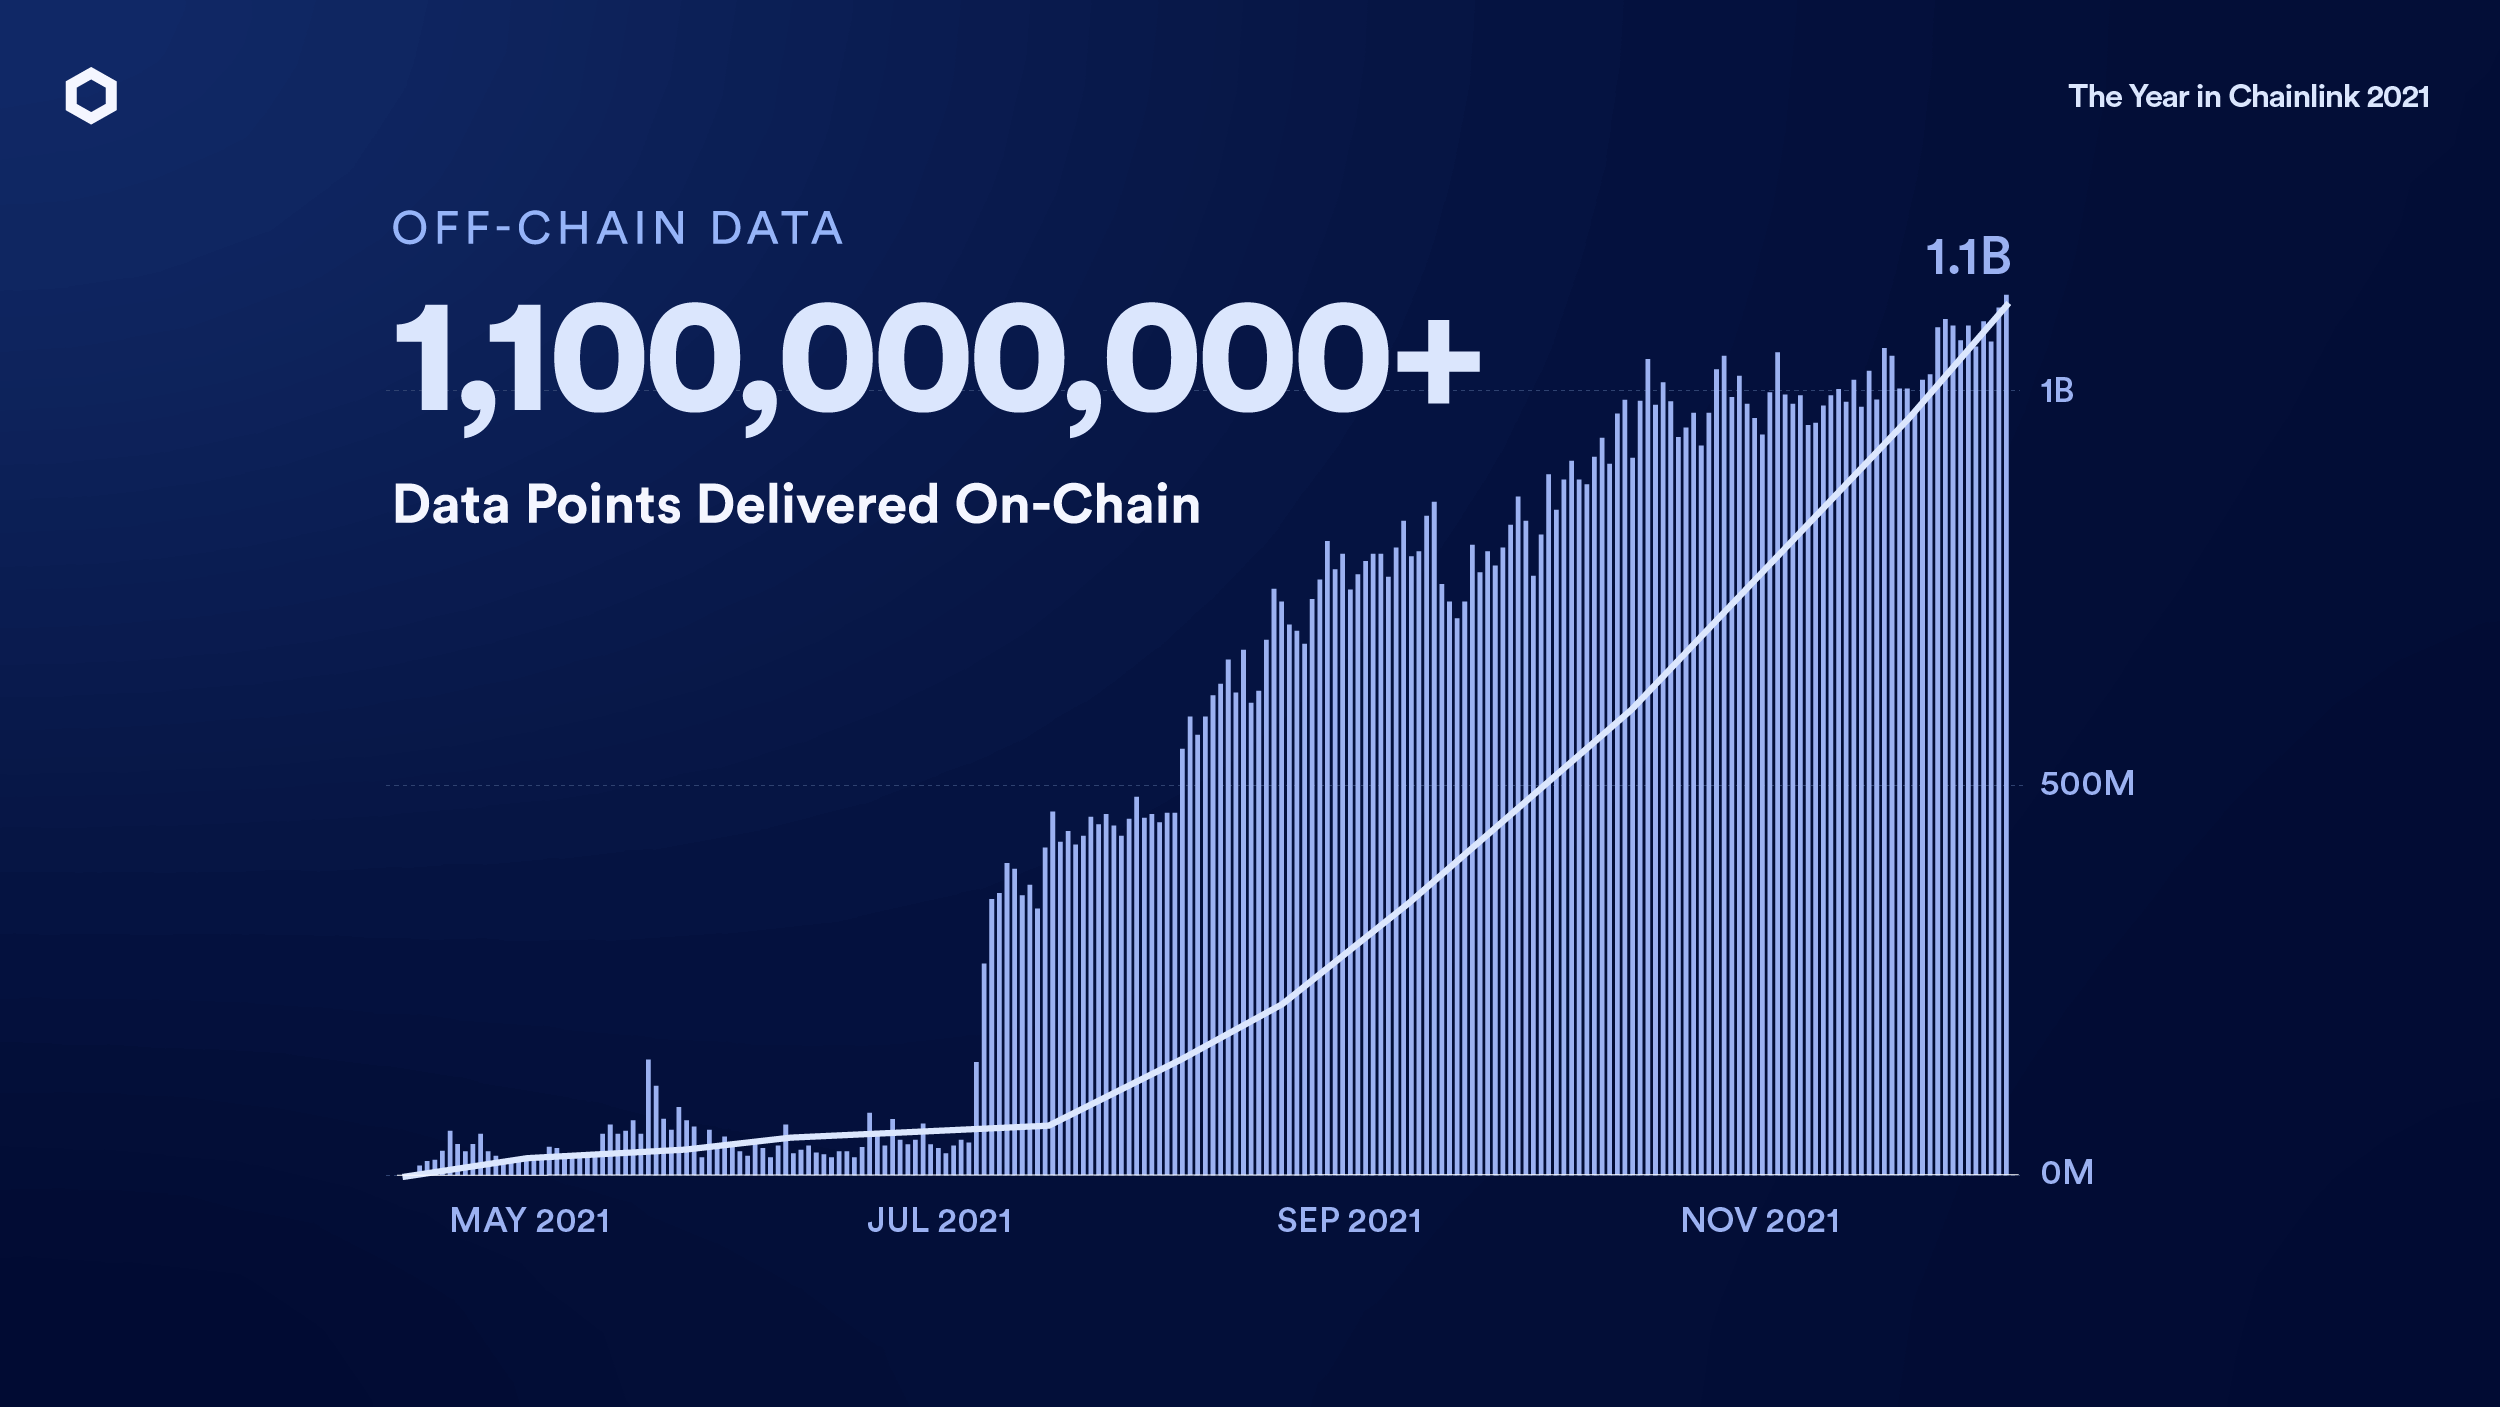 Data points delivered on-chain (Chainlink)